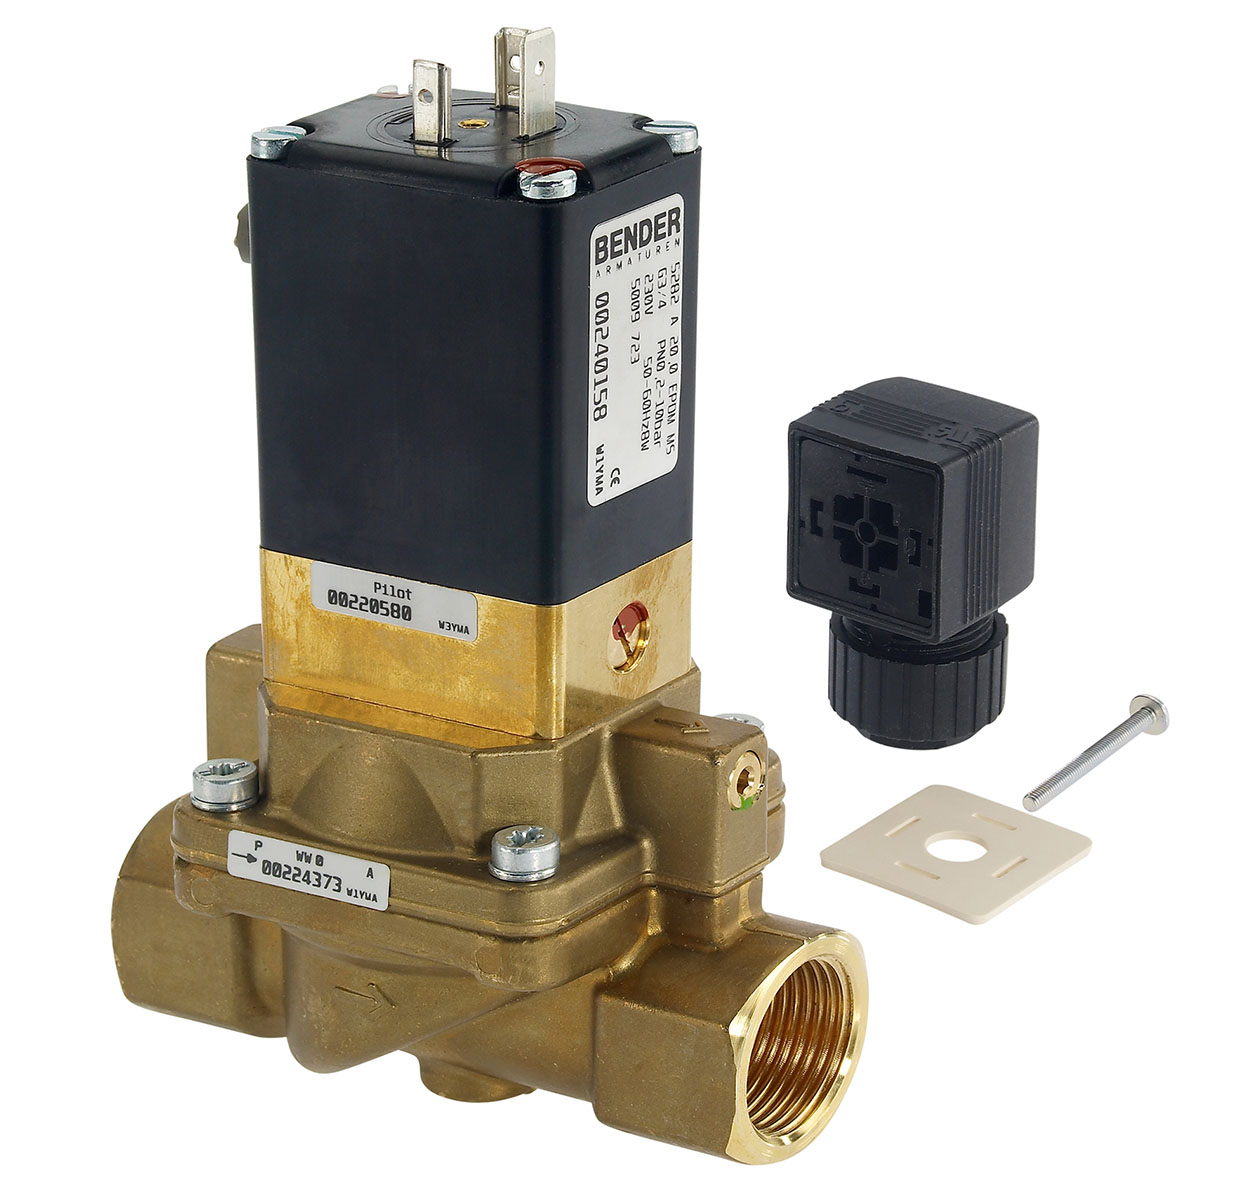 5009707 - 2/2 way solenoid valve normally closed for lightly soiled fluids Type 7; female thread